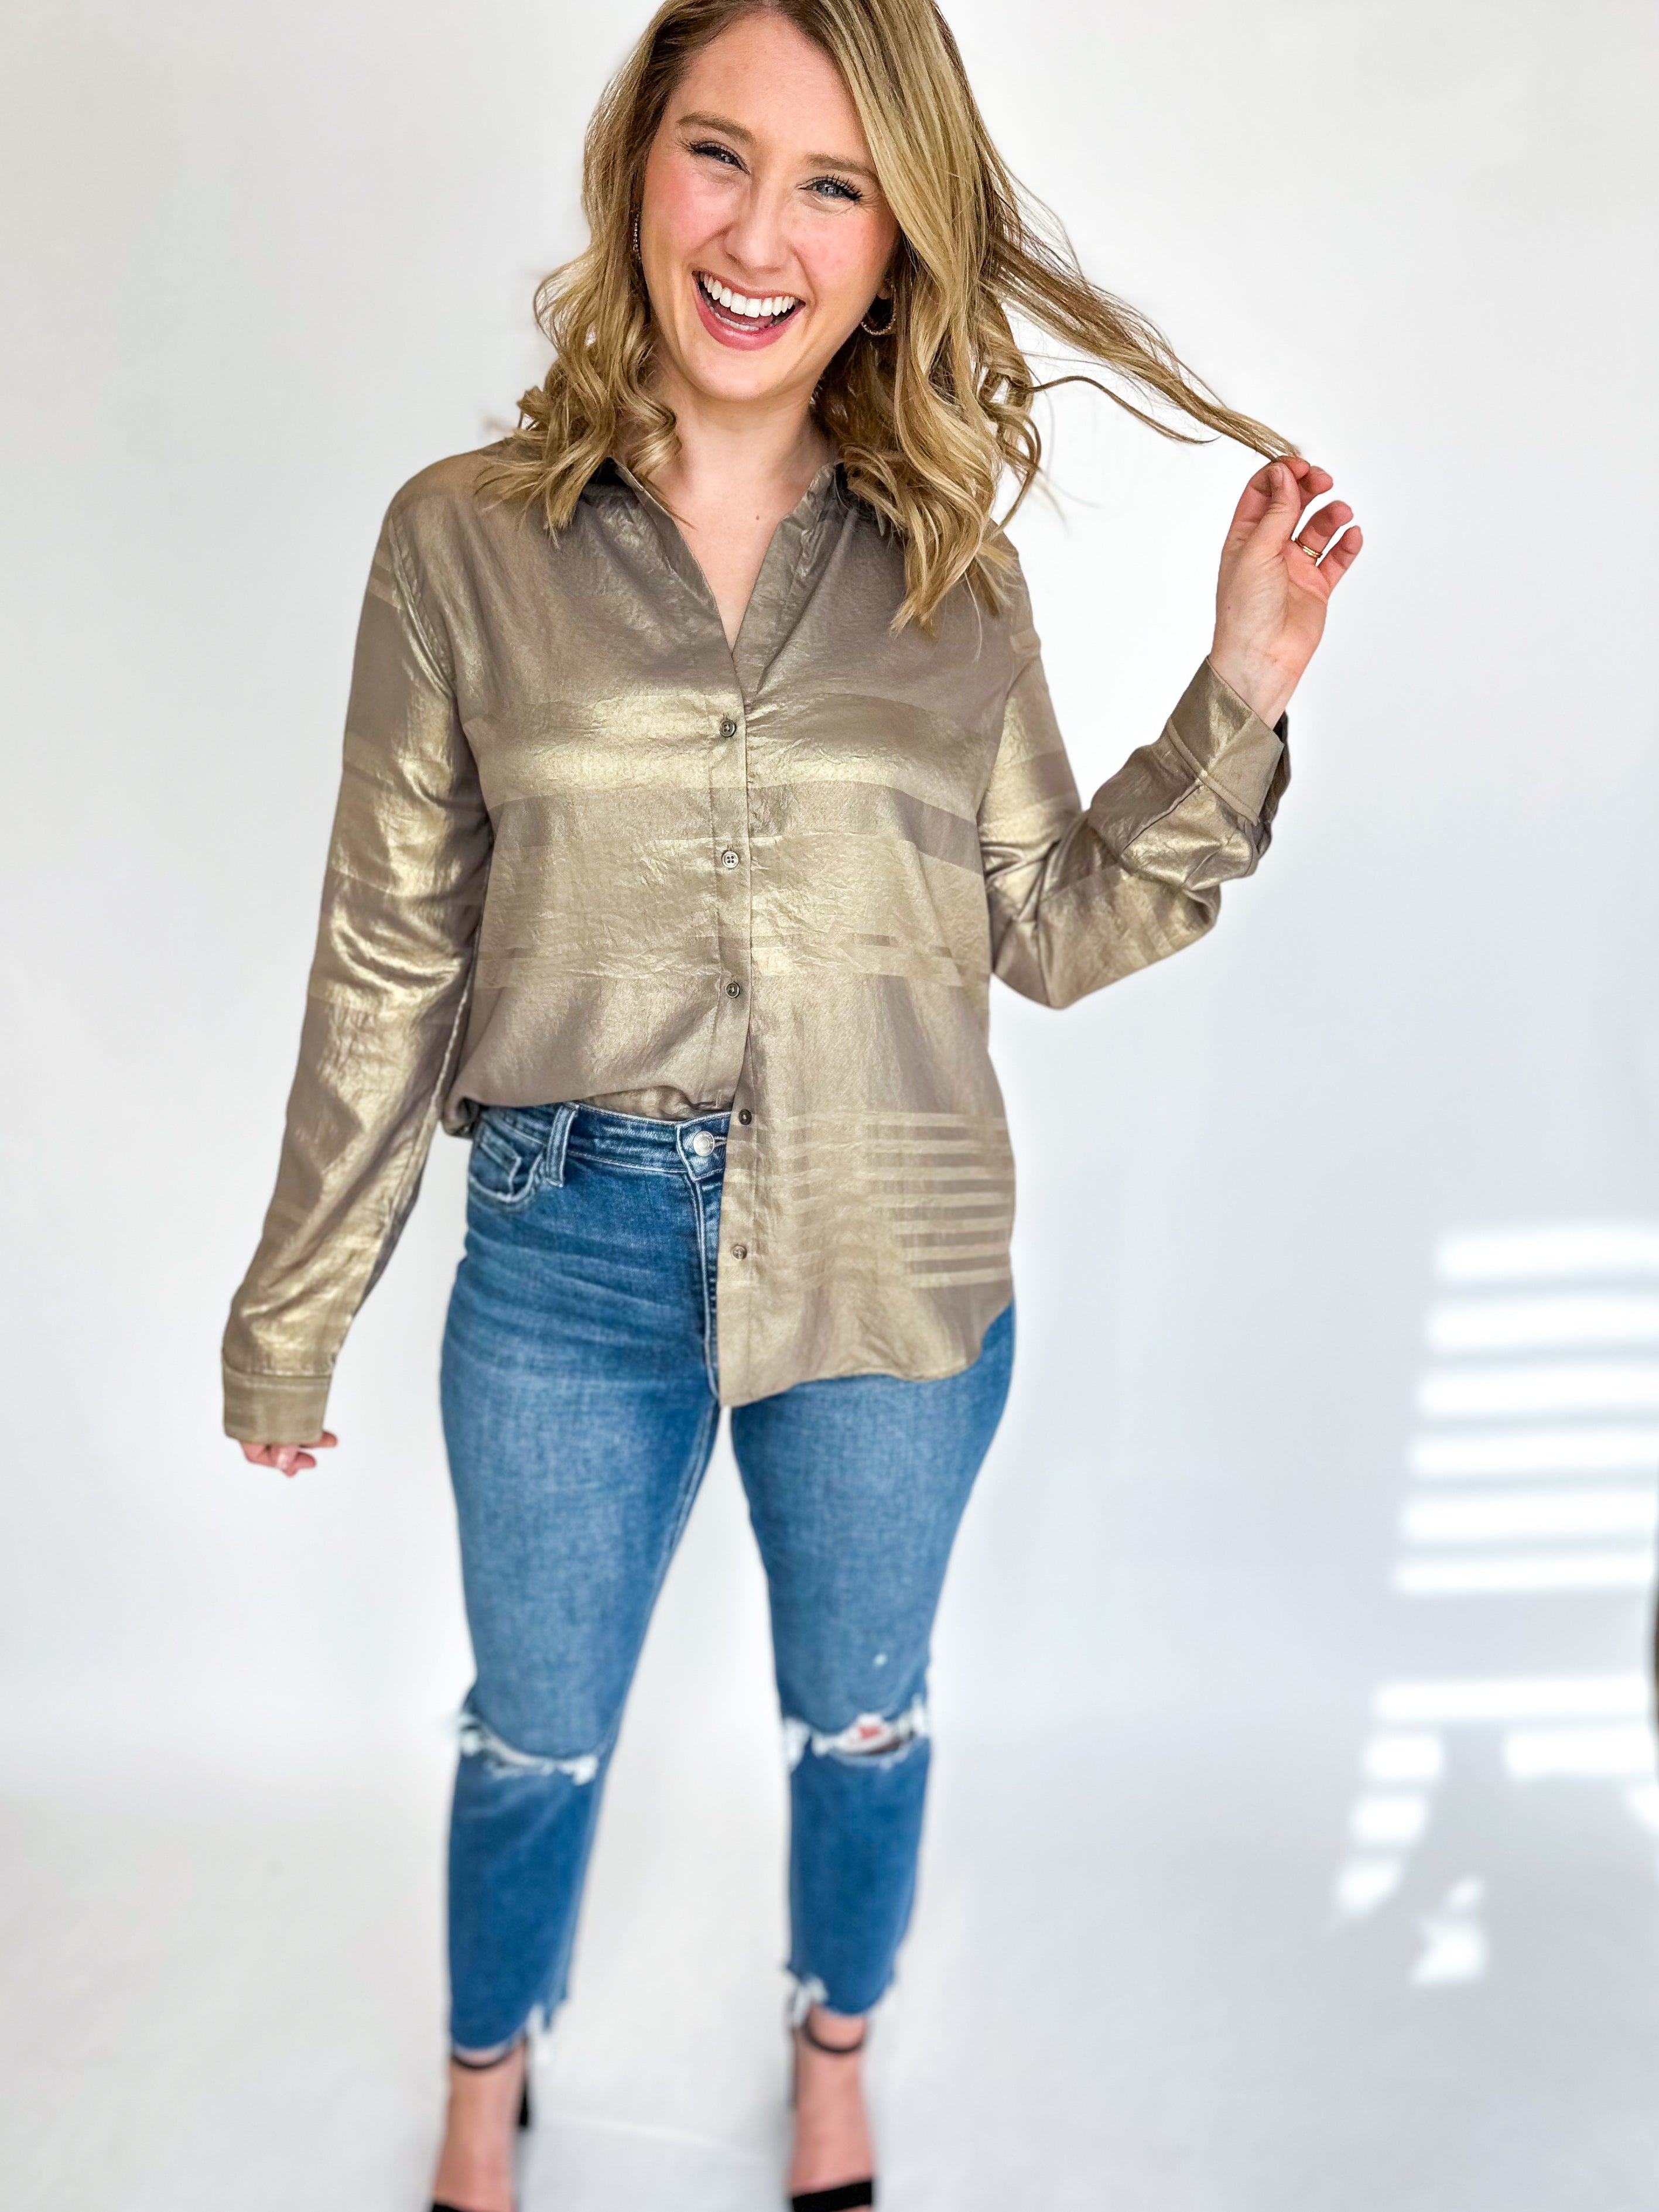 Be Present Blouse - Gold-200 Fashion Blouses-CURRENT AIR CLOTHING-July & June Women's Fashion Boutique Located in San Antonio, Texas